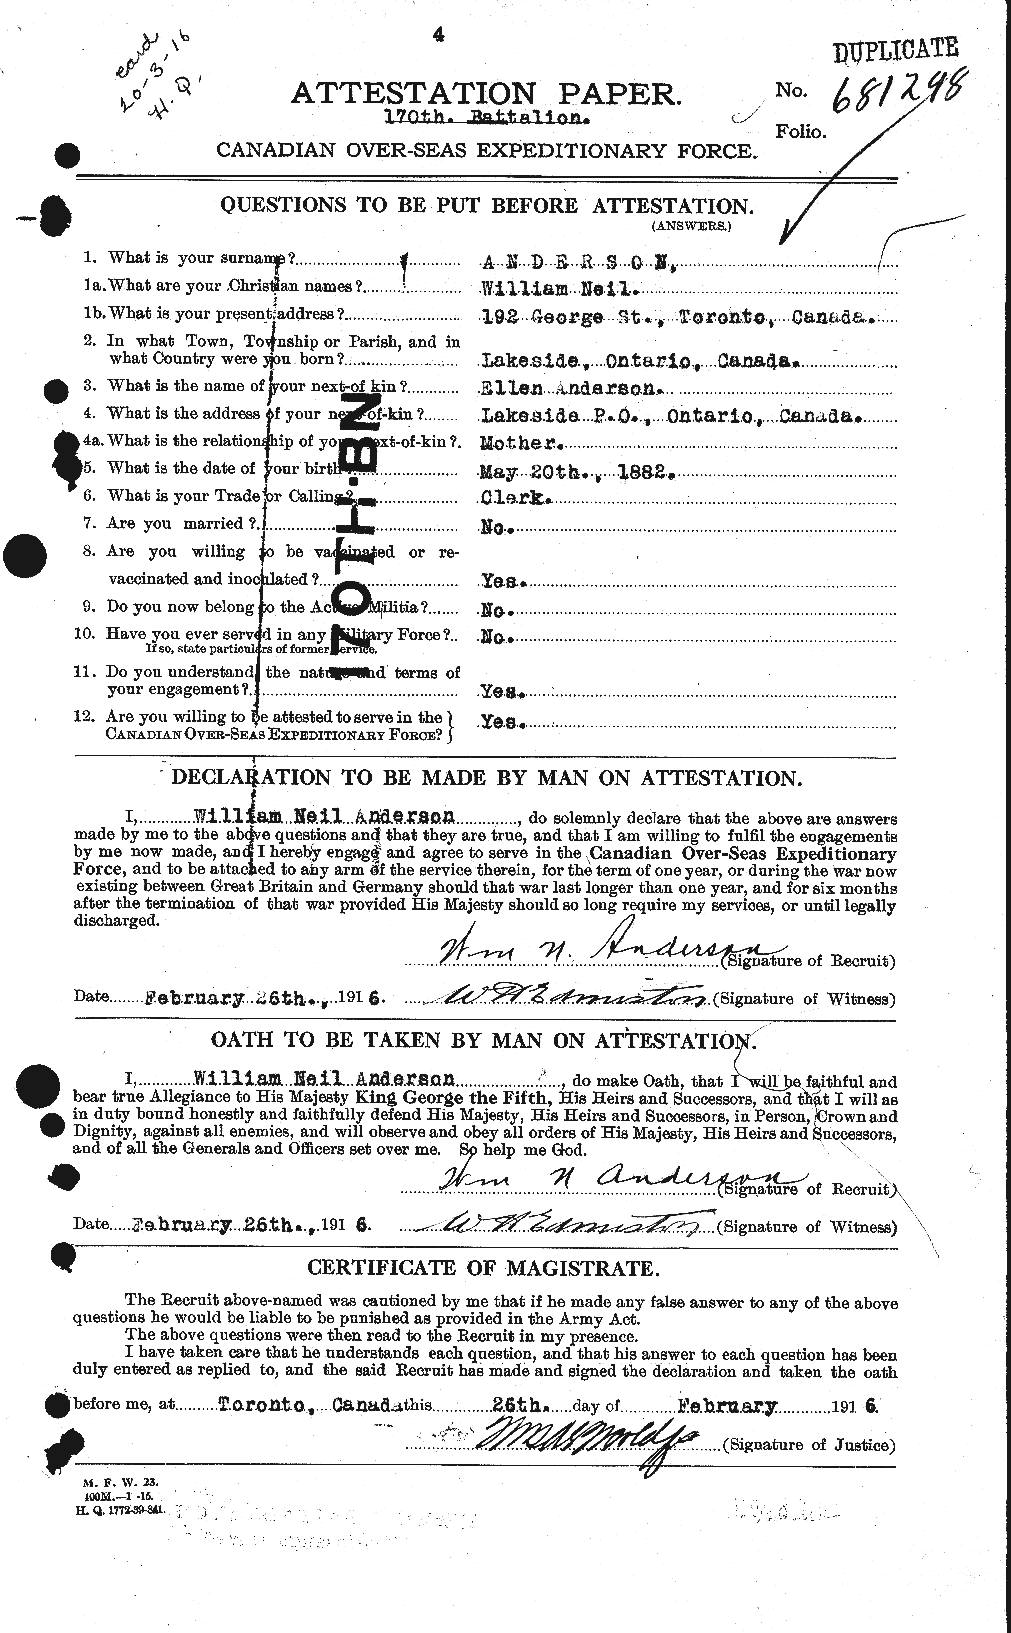 Personnel Records of the First World War - CEF 210837a